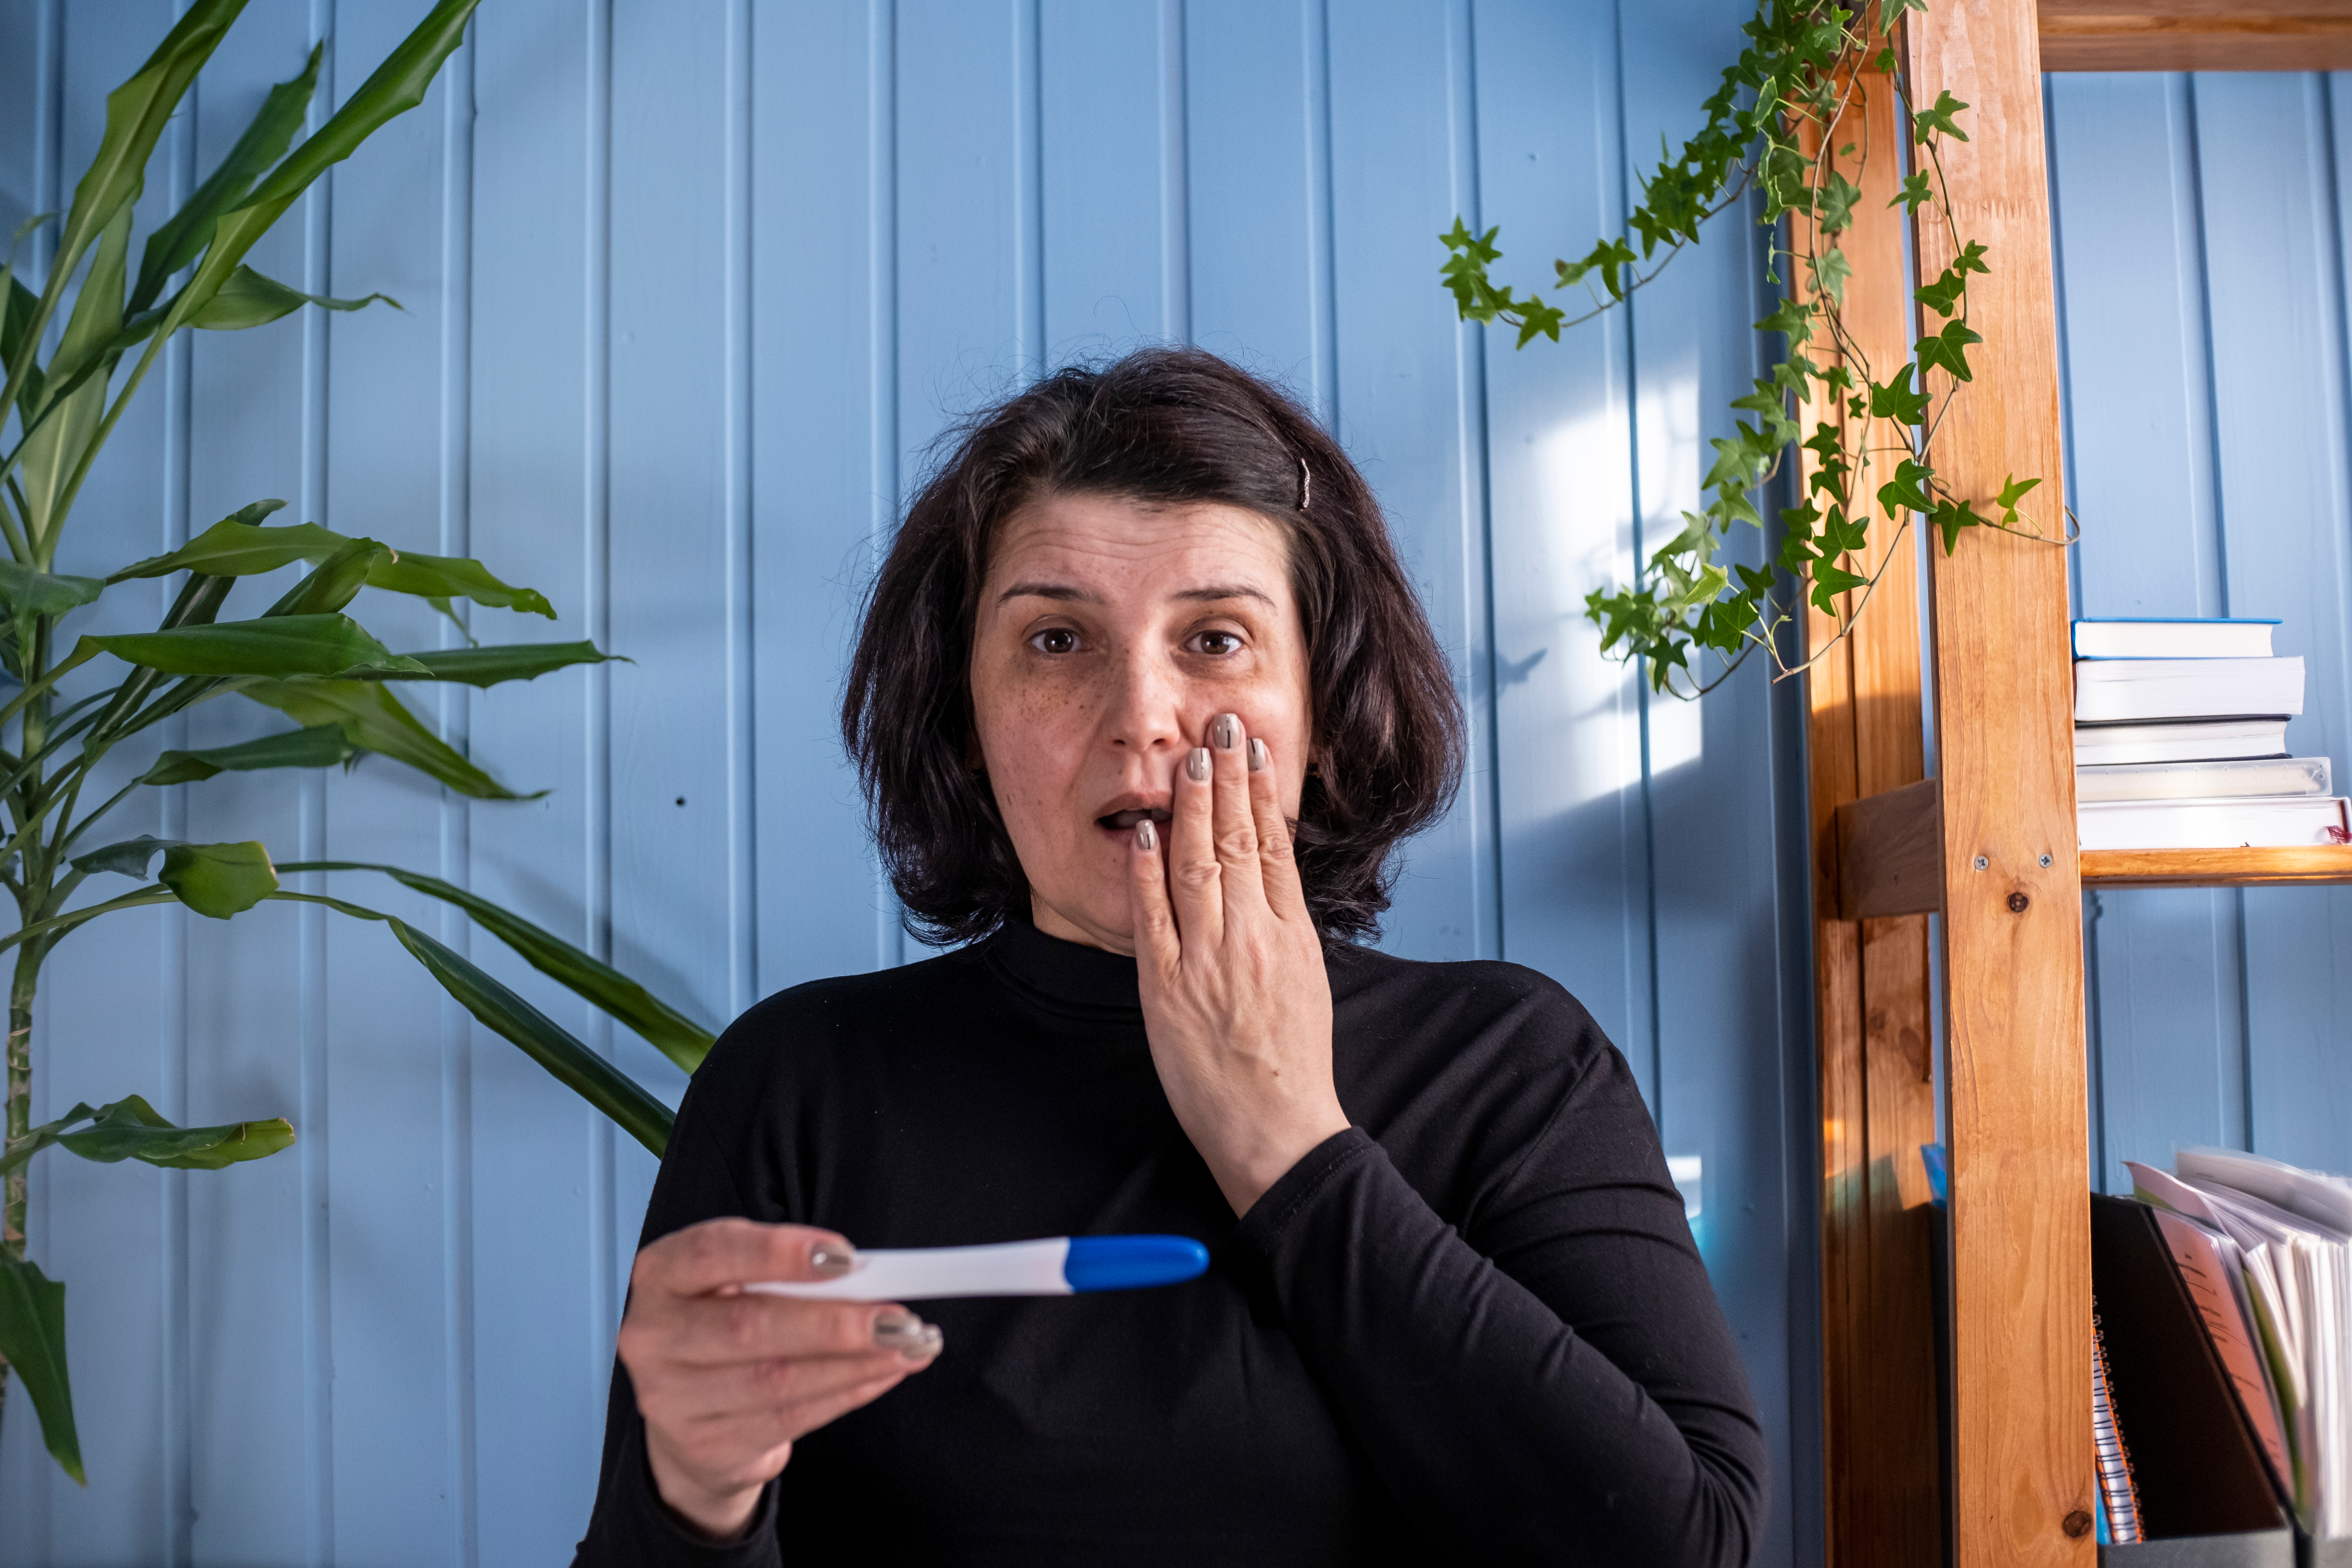 A middle-aged woman looking at a pregnancy test result showing positive | Source: Shutterstock